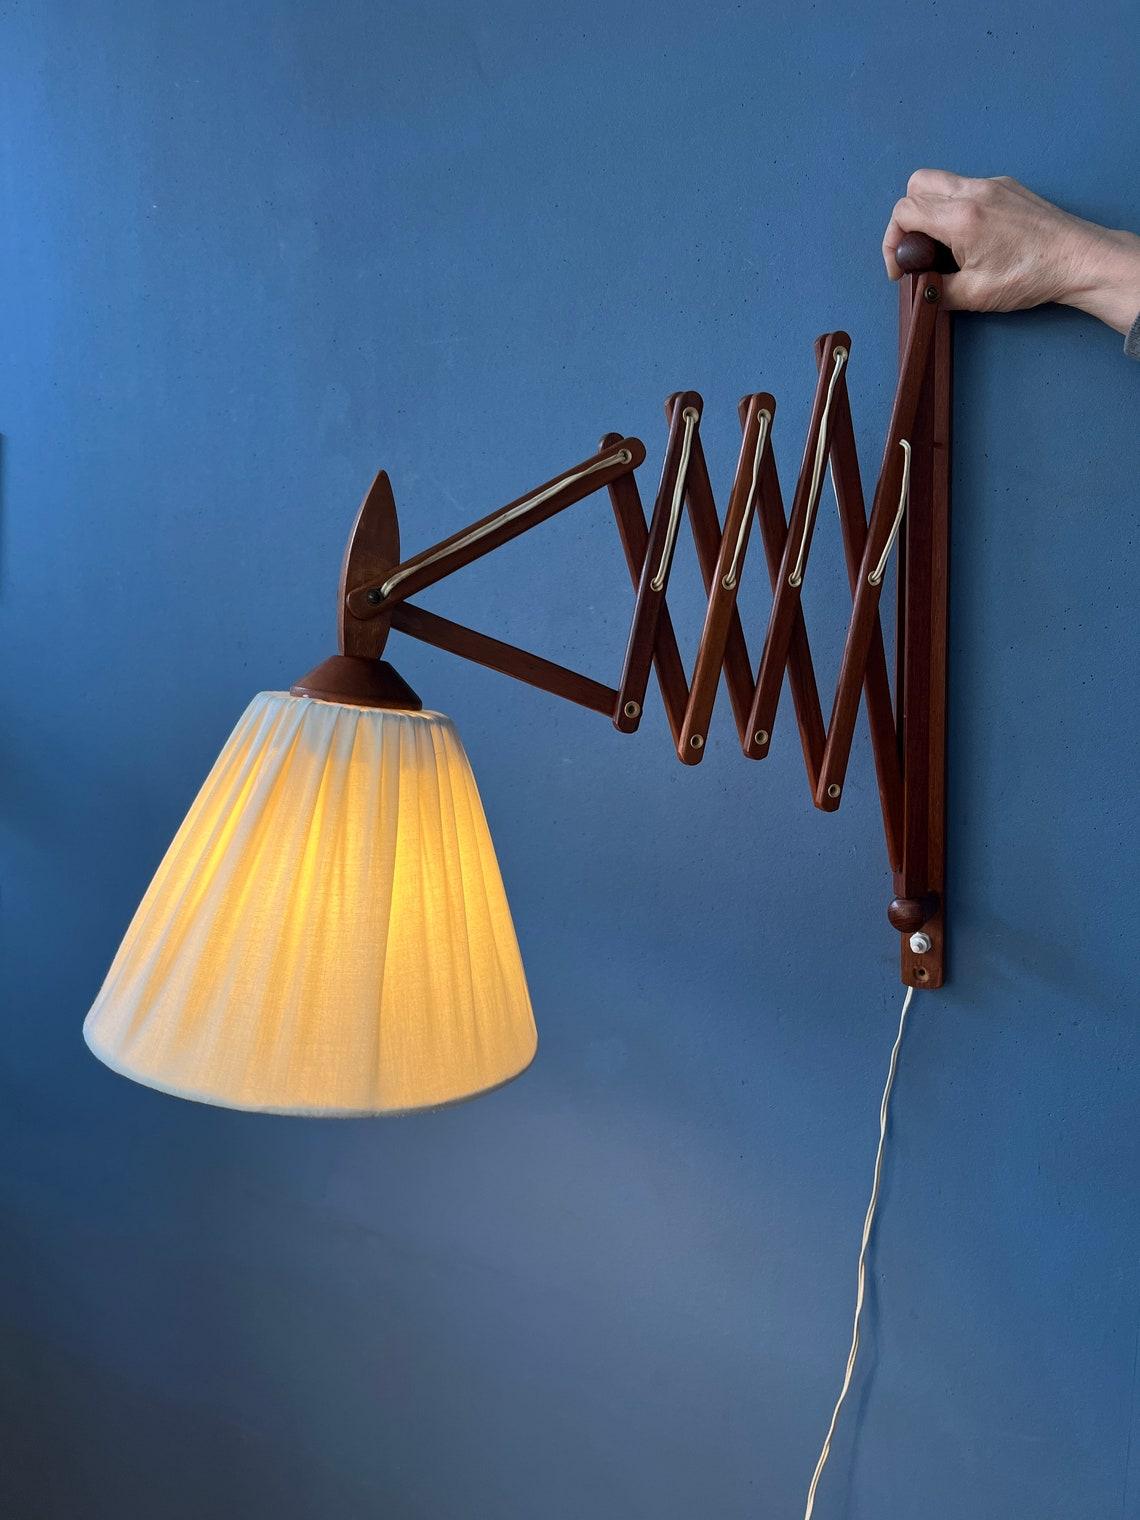 Mid century Danish style scissor lamp with wooden frame and beige shade. The scissor-mechanism allows you to extend the lamp from the wall. The shade can be adjusted too. The lamp requires an E27/26 (standard) lightbulb and currently has an